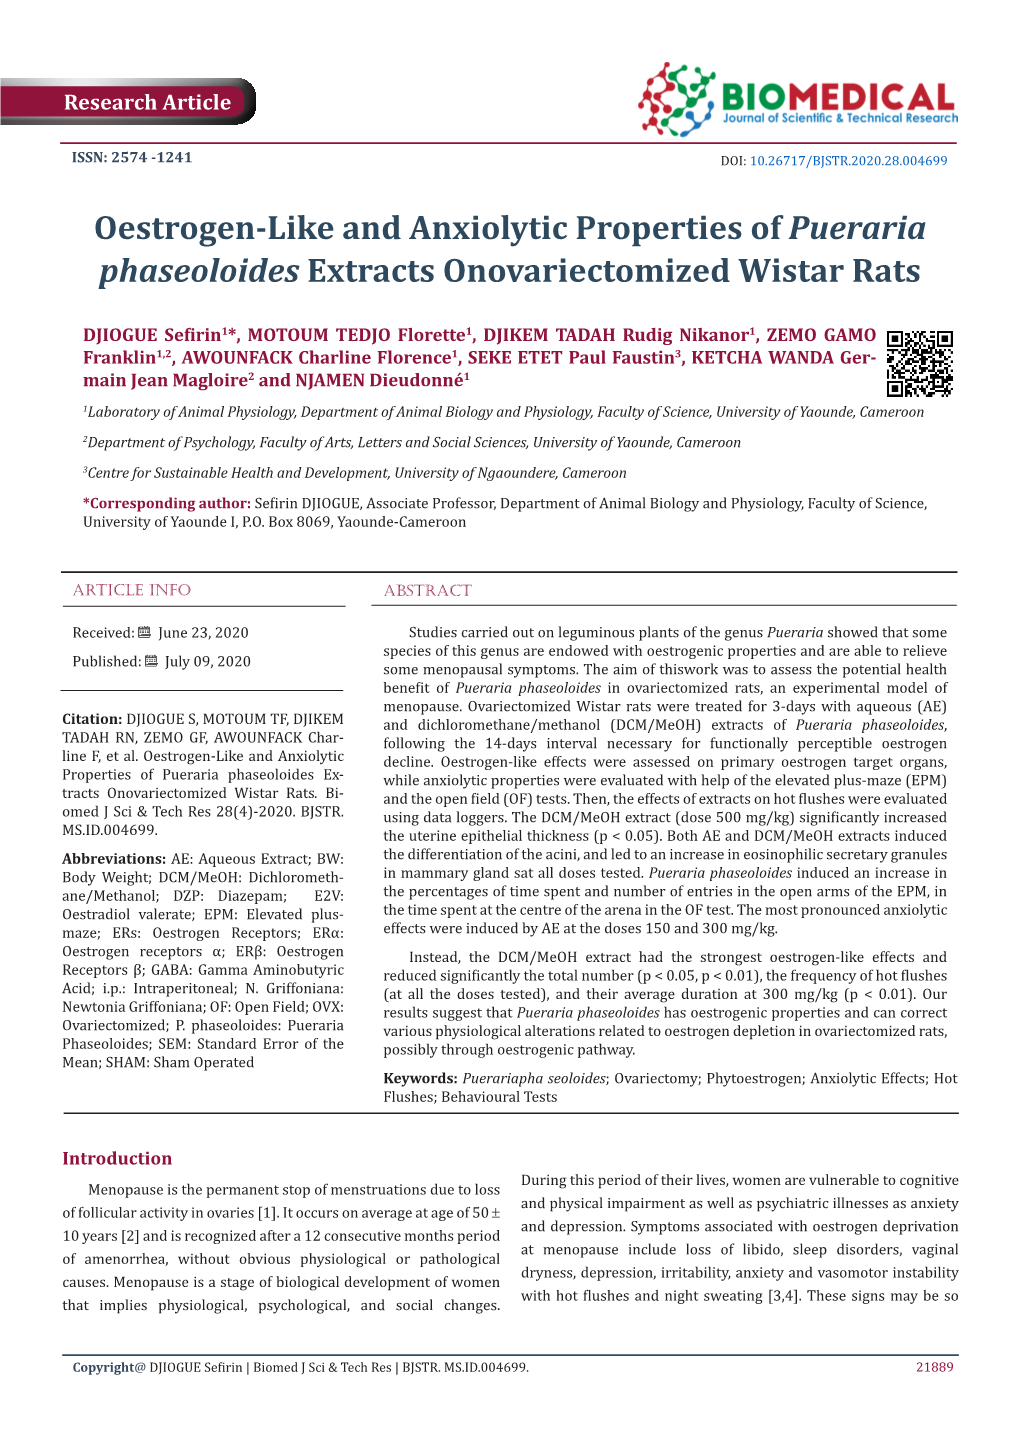 Oestrogen-Like and Anxiolytic Properties of Pueraria Phaseoloides Extracts Onovariectomized Wistar Rats